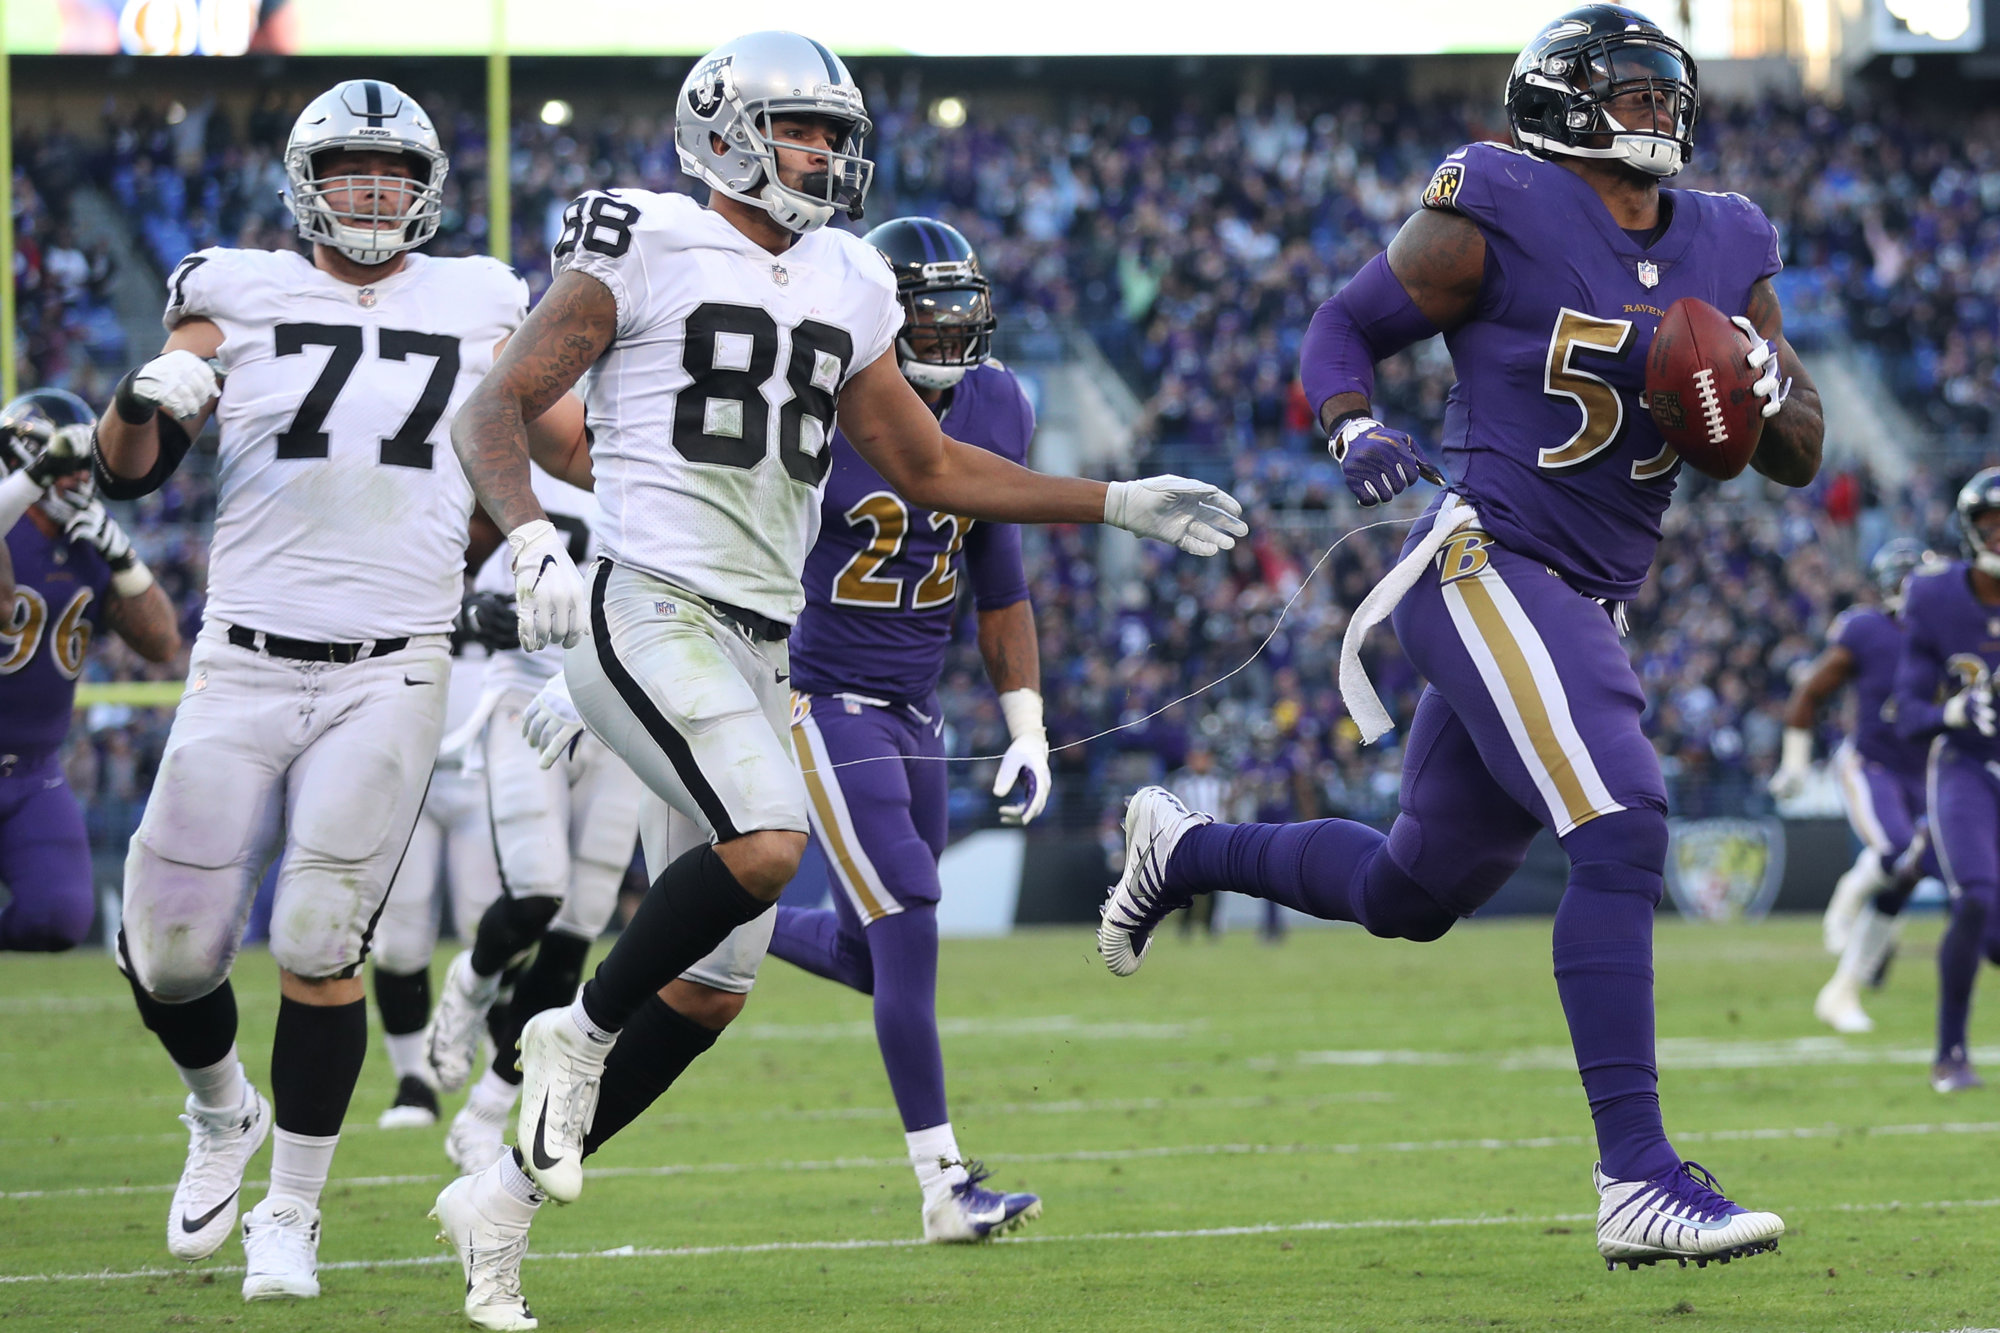 BALTIMORE, MARYLAND - NOVEMBER 25: Outside linebacker Terrell Suggs #55 of the Baltimore Ravens rushes for a touchdown after a fumble recovery against the Oakland Raiders during the fourth quarter at M&amp;T Bank Stadium on November 25, 2018 in Baltimore, Maryland. (Photo by Patrick Smith/Getty Images)